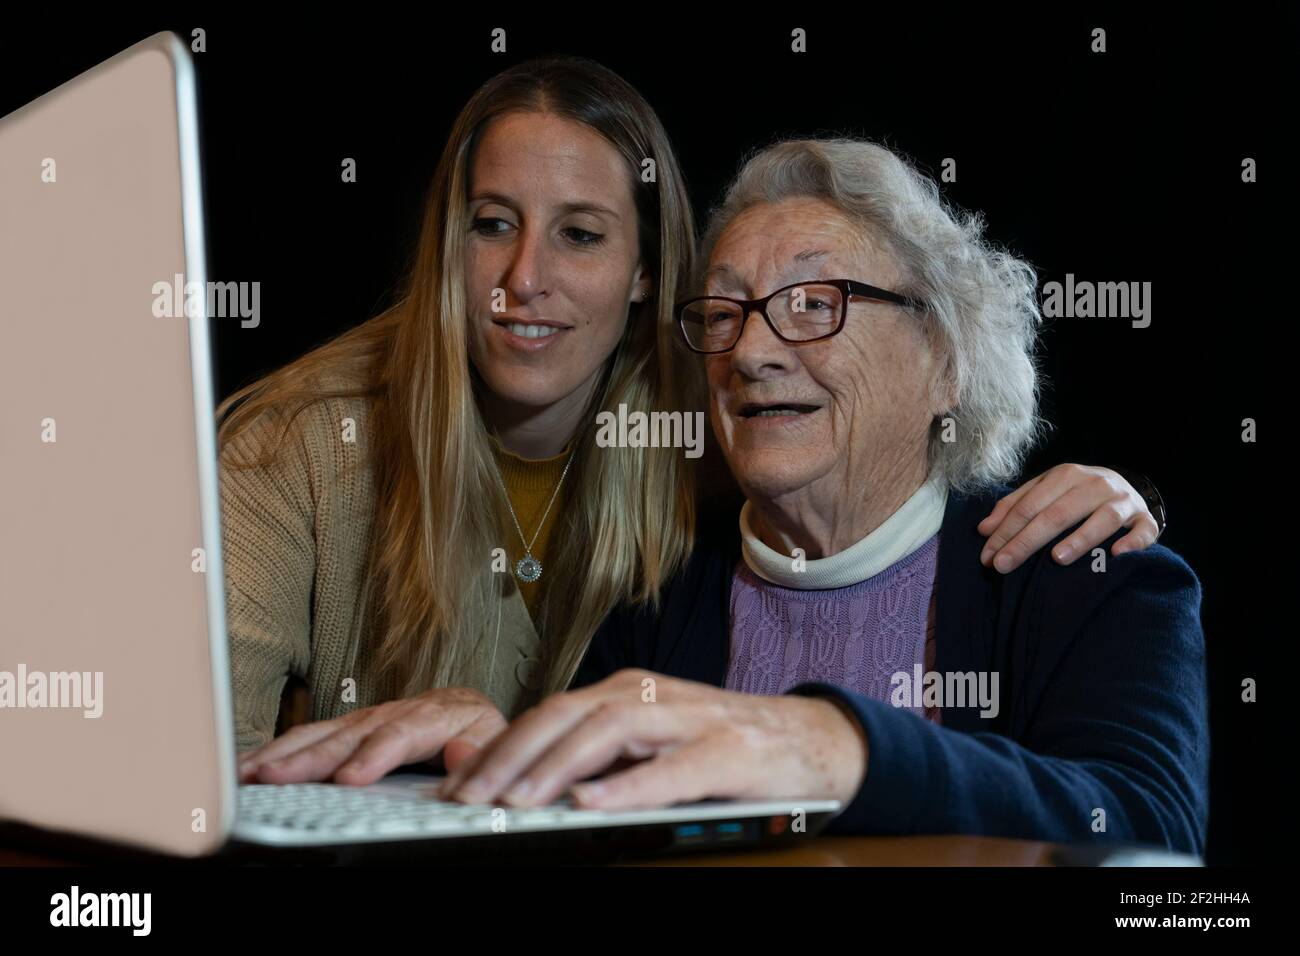 Smiling senior 80s woman with granddaughter using computer.Young female help or teach to surf internet grandparent.Family having fun together watching Stock Photo